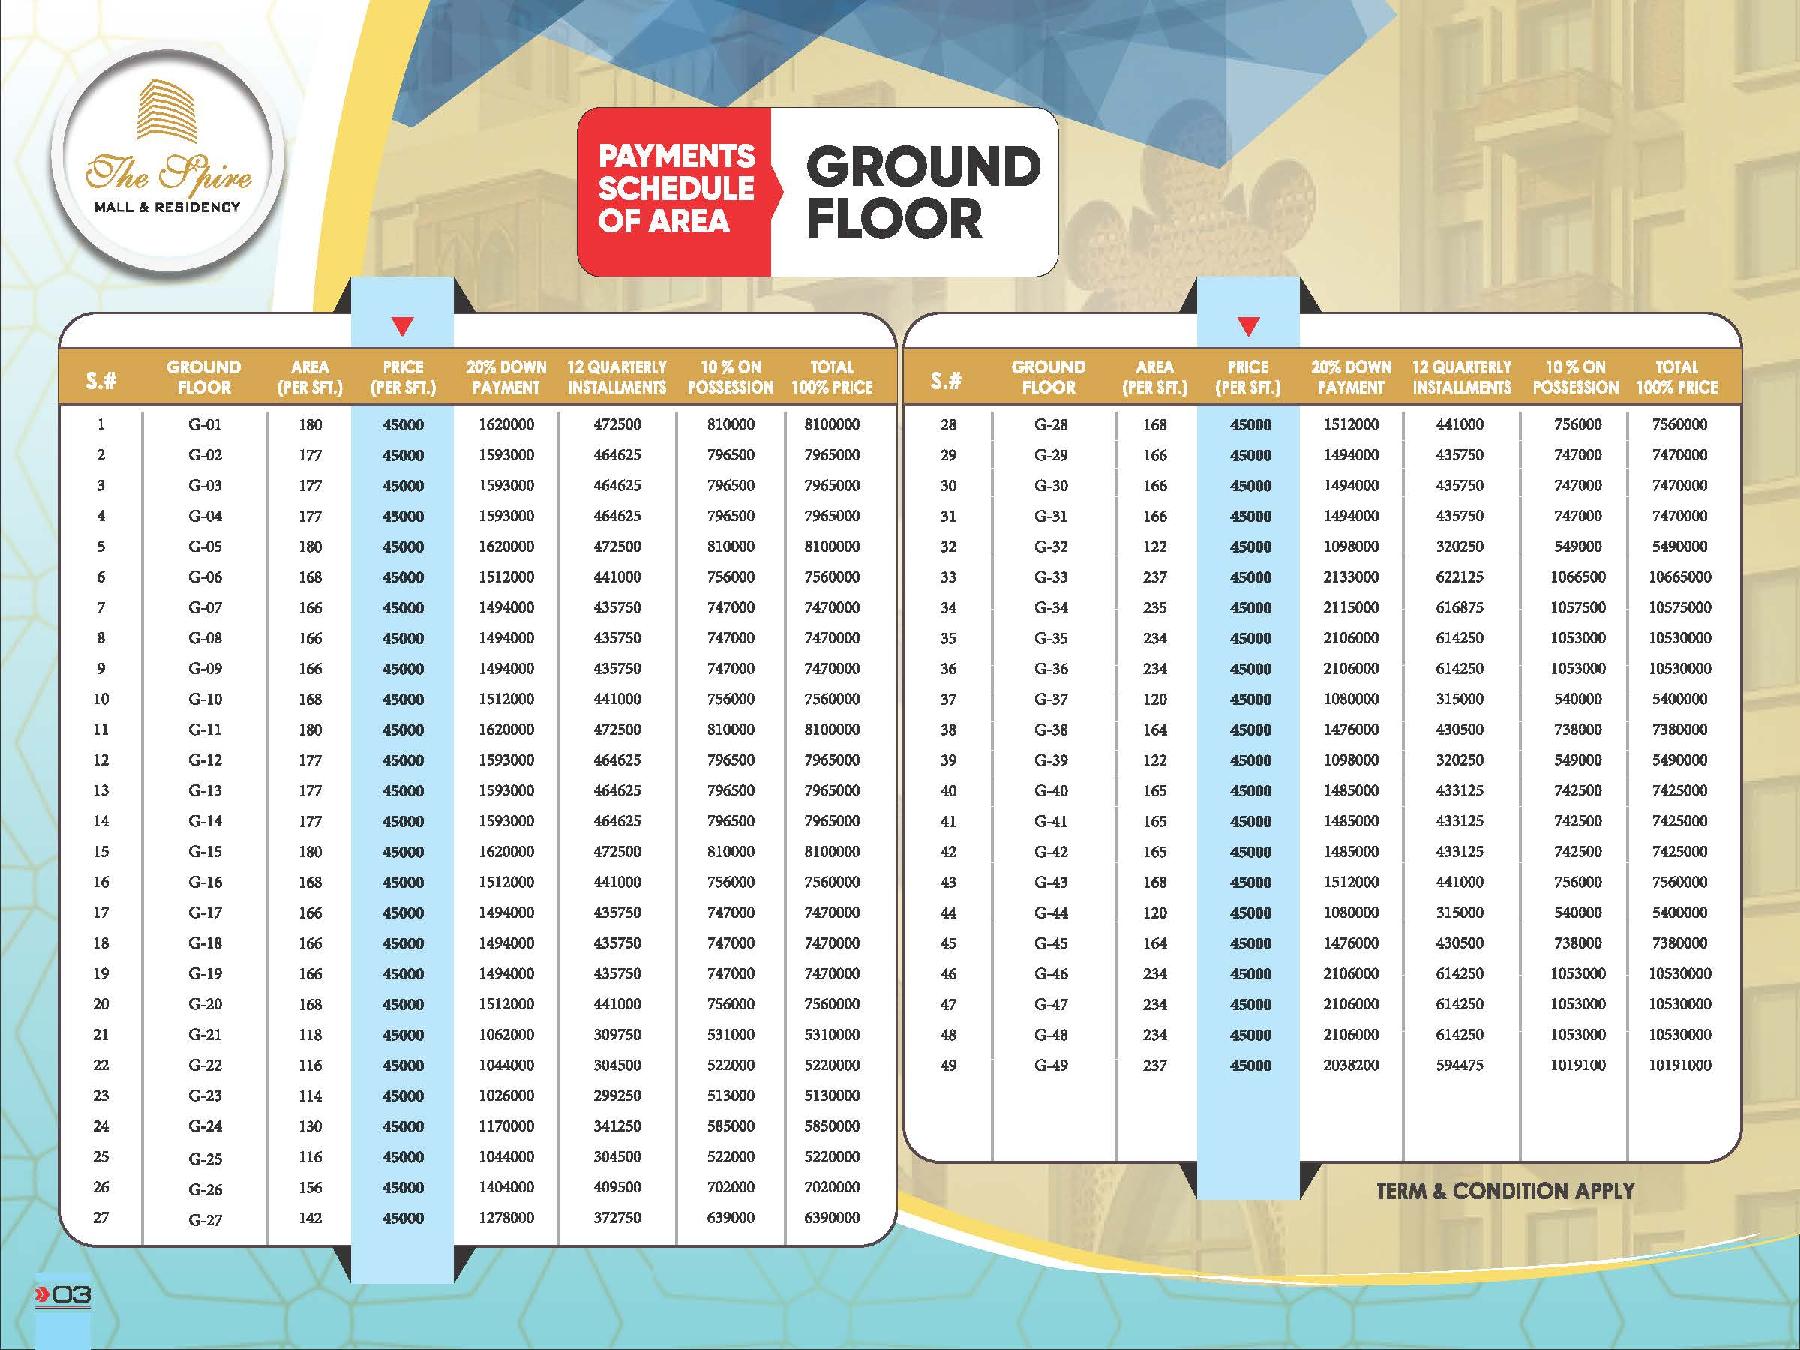 The Spire Mall Ground Floor Shops Payment Plan